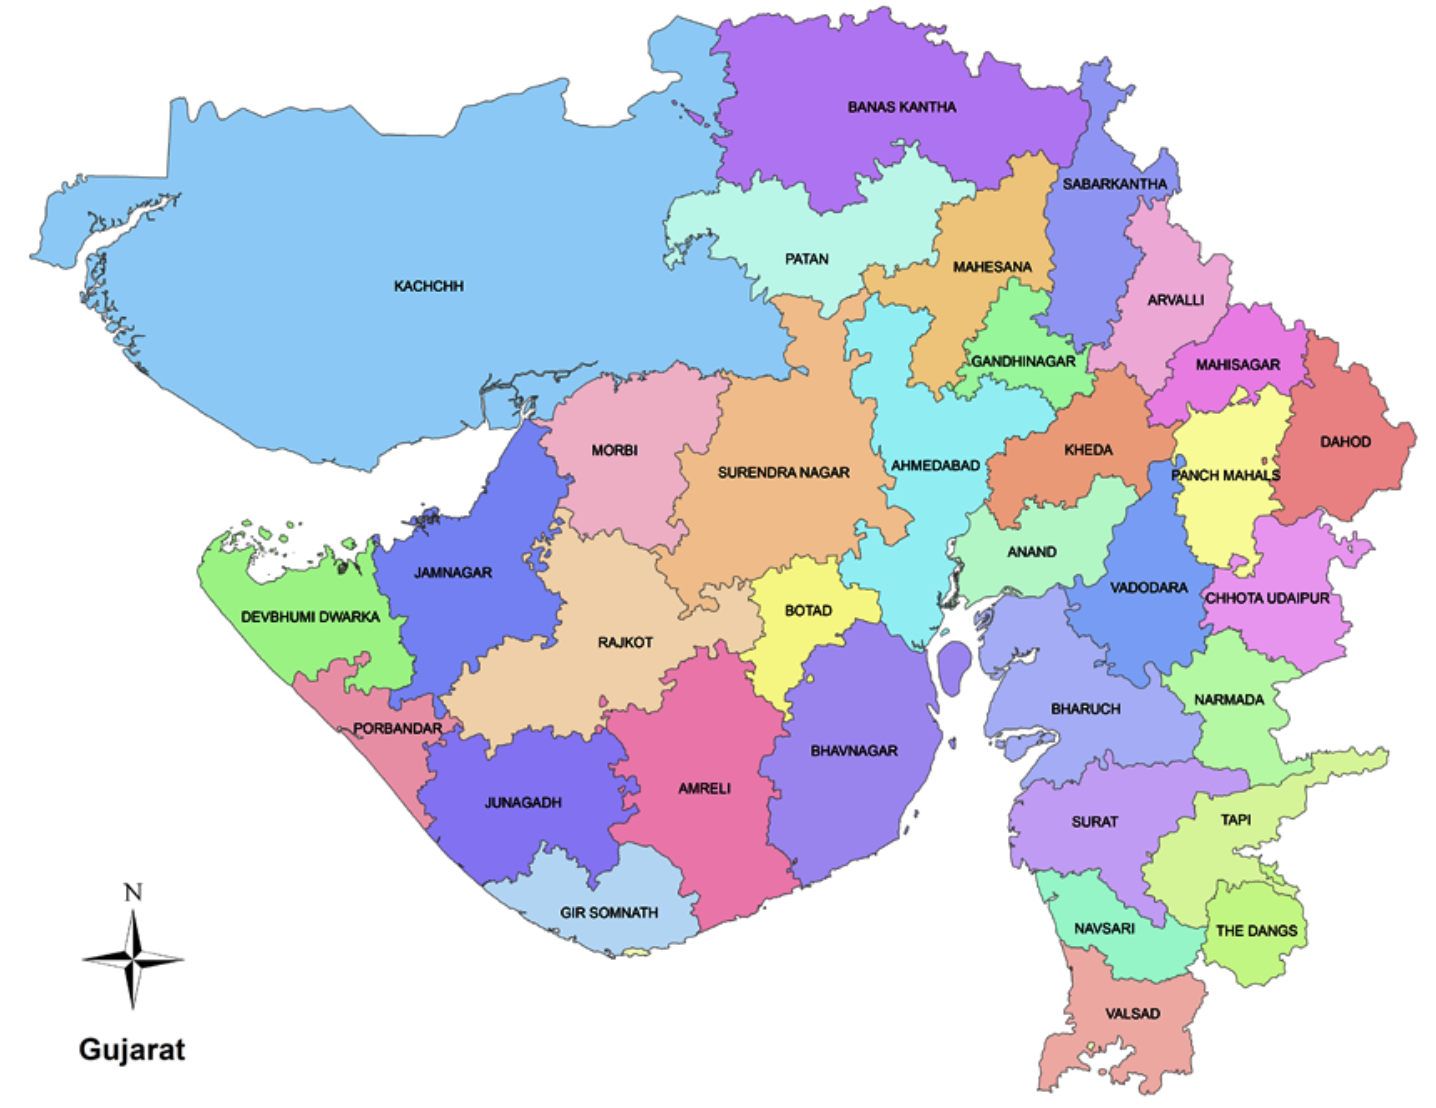 The Rise of Modi and the Hindu Nationalist Movement in Gujarat